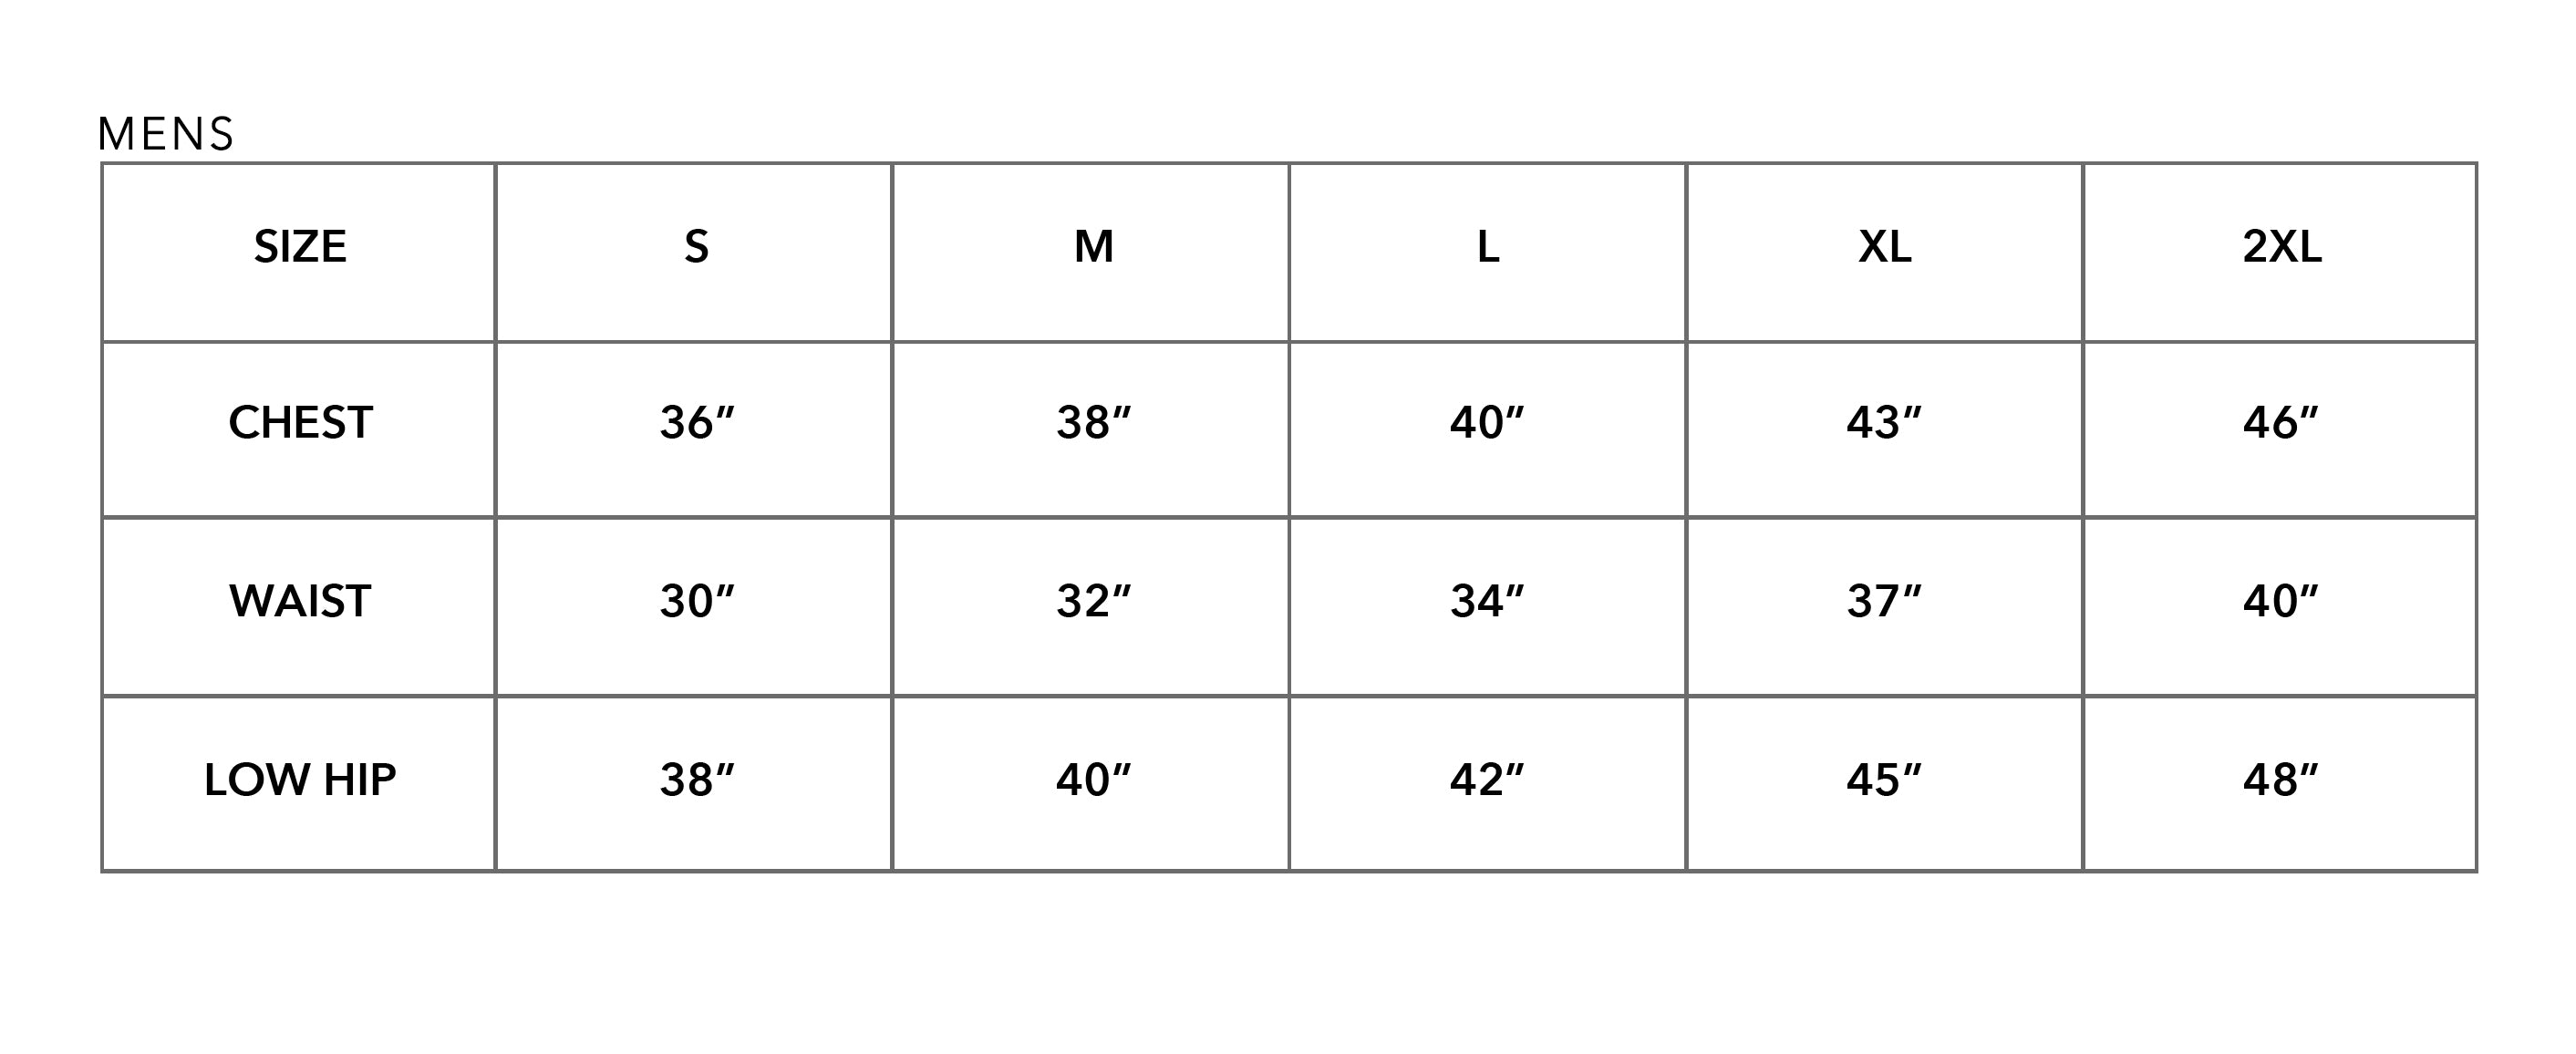 Monrow Clothing Size Chart